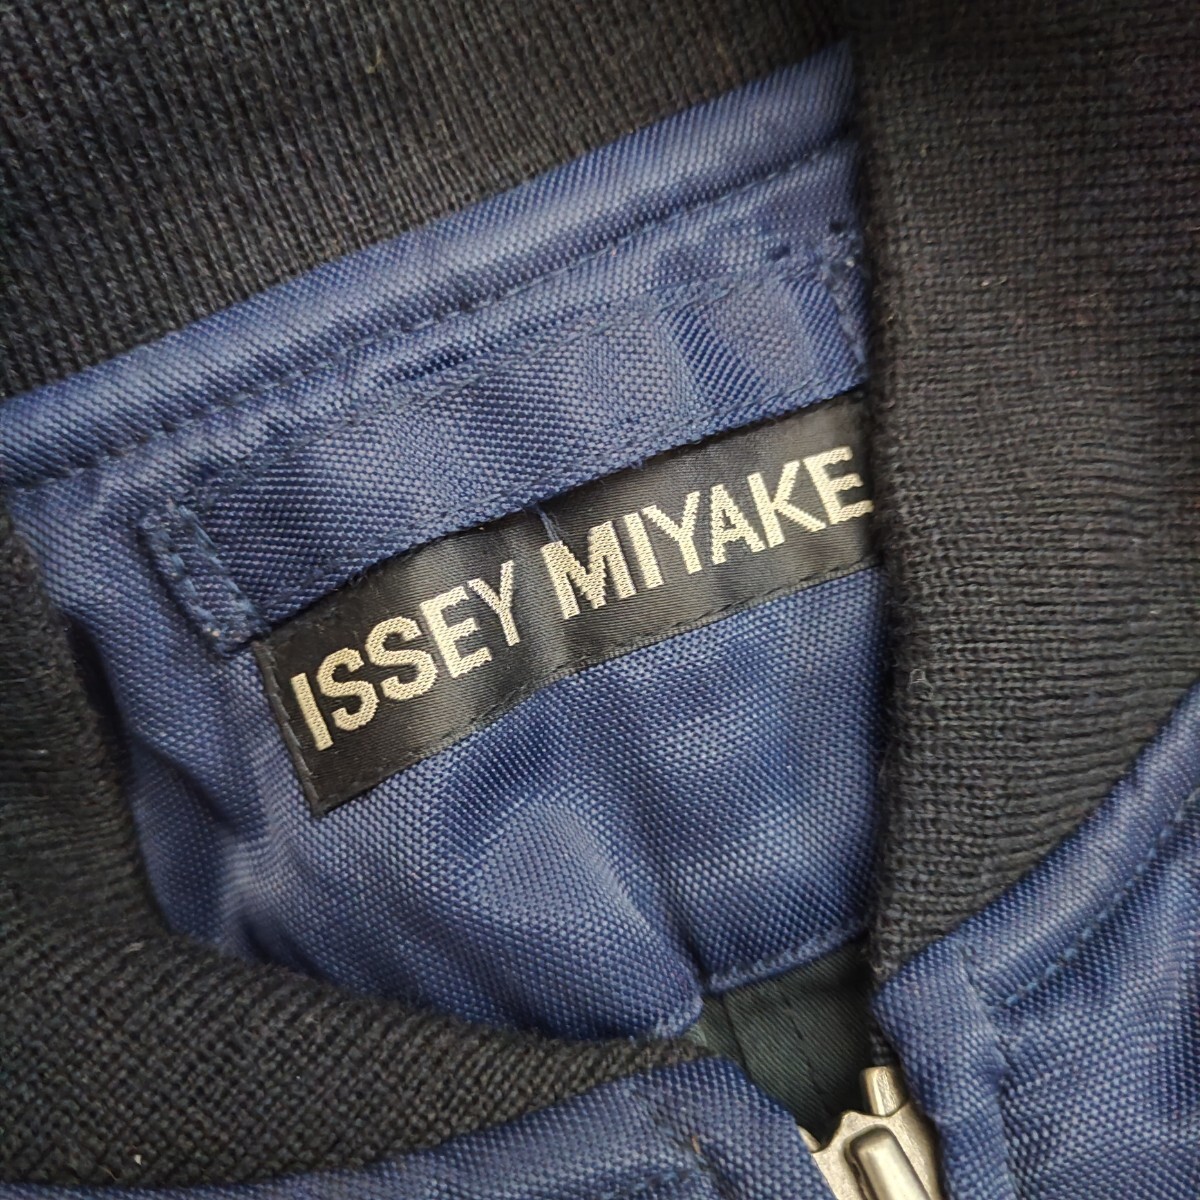 SS1994 Issey Miyake Men EMBROIDERED PATCH LEATHER BOMBER JACKET イッセイミヤケ メン レザー ジャケット 80s 90s archive vintage_画像3